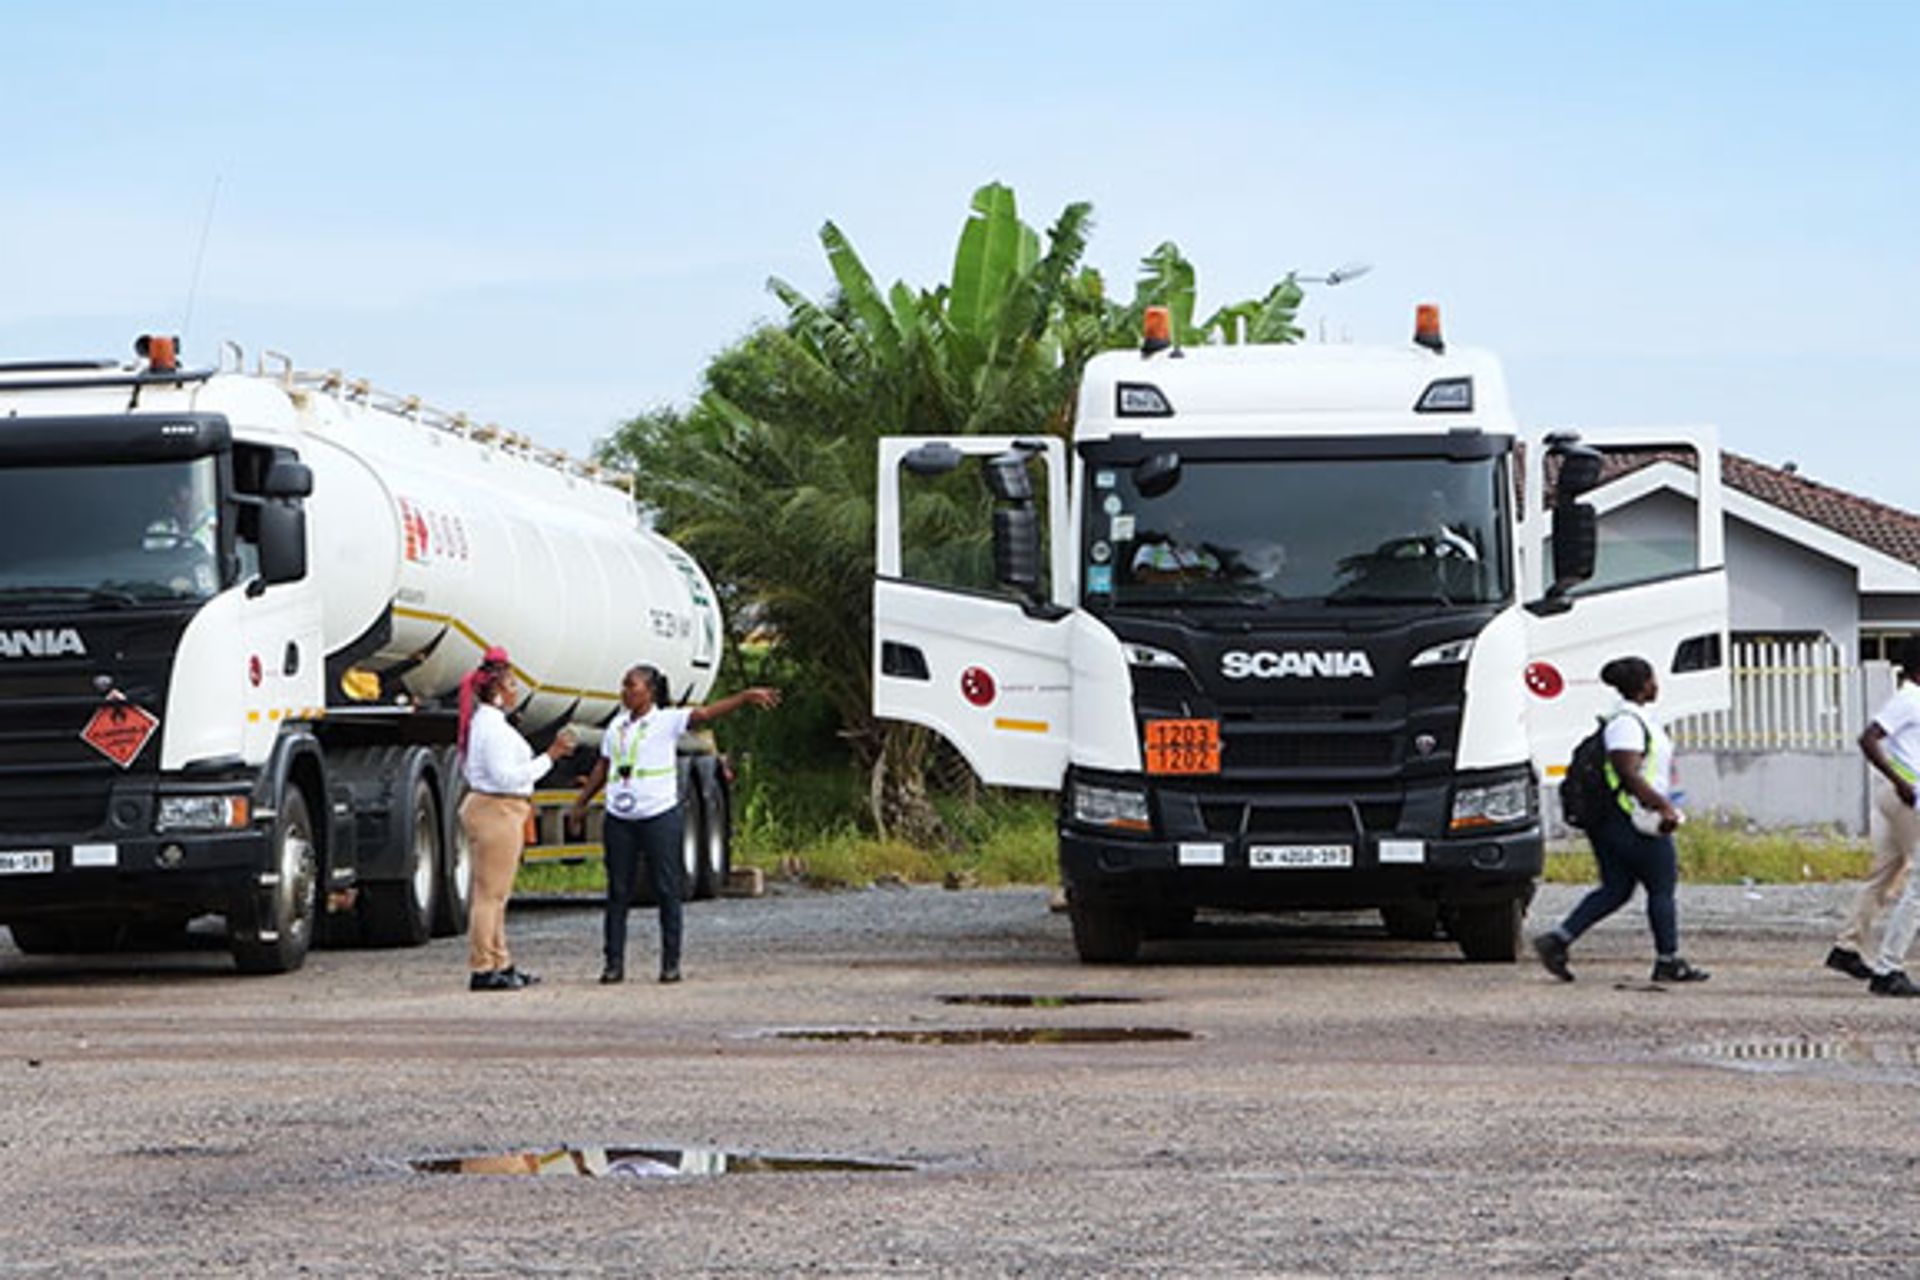 In the West African nation of Ghana, Scania is collaborating with Deutsche Gesellschaft für Internationale Zusammenarbeit (GIZ) GmbH, a German agency for sustainable development, to train women as bus or truck drivers in six months.
                 